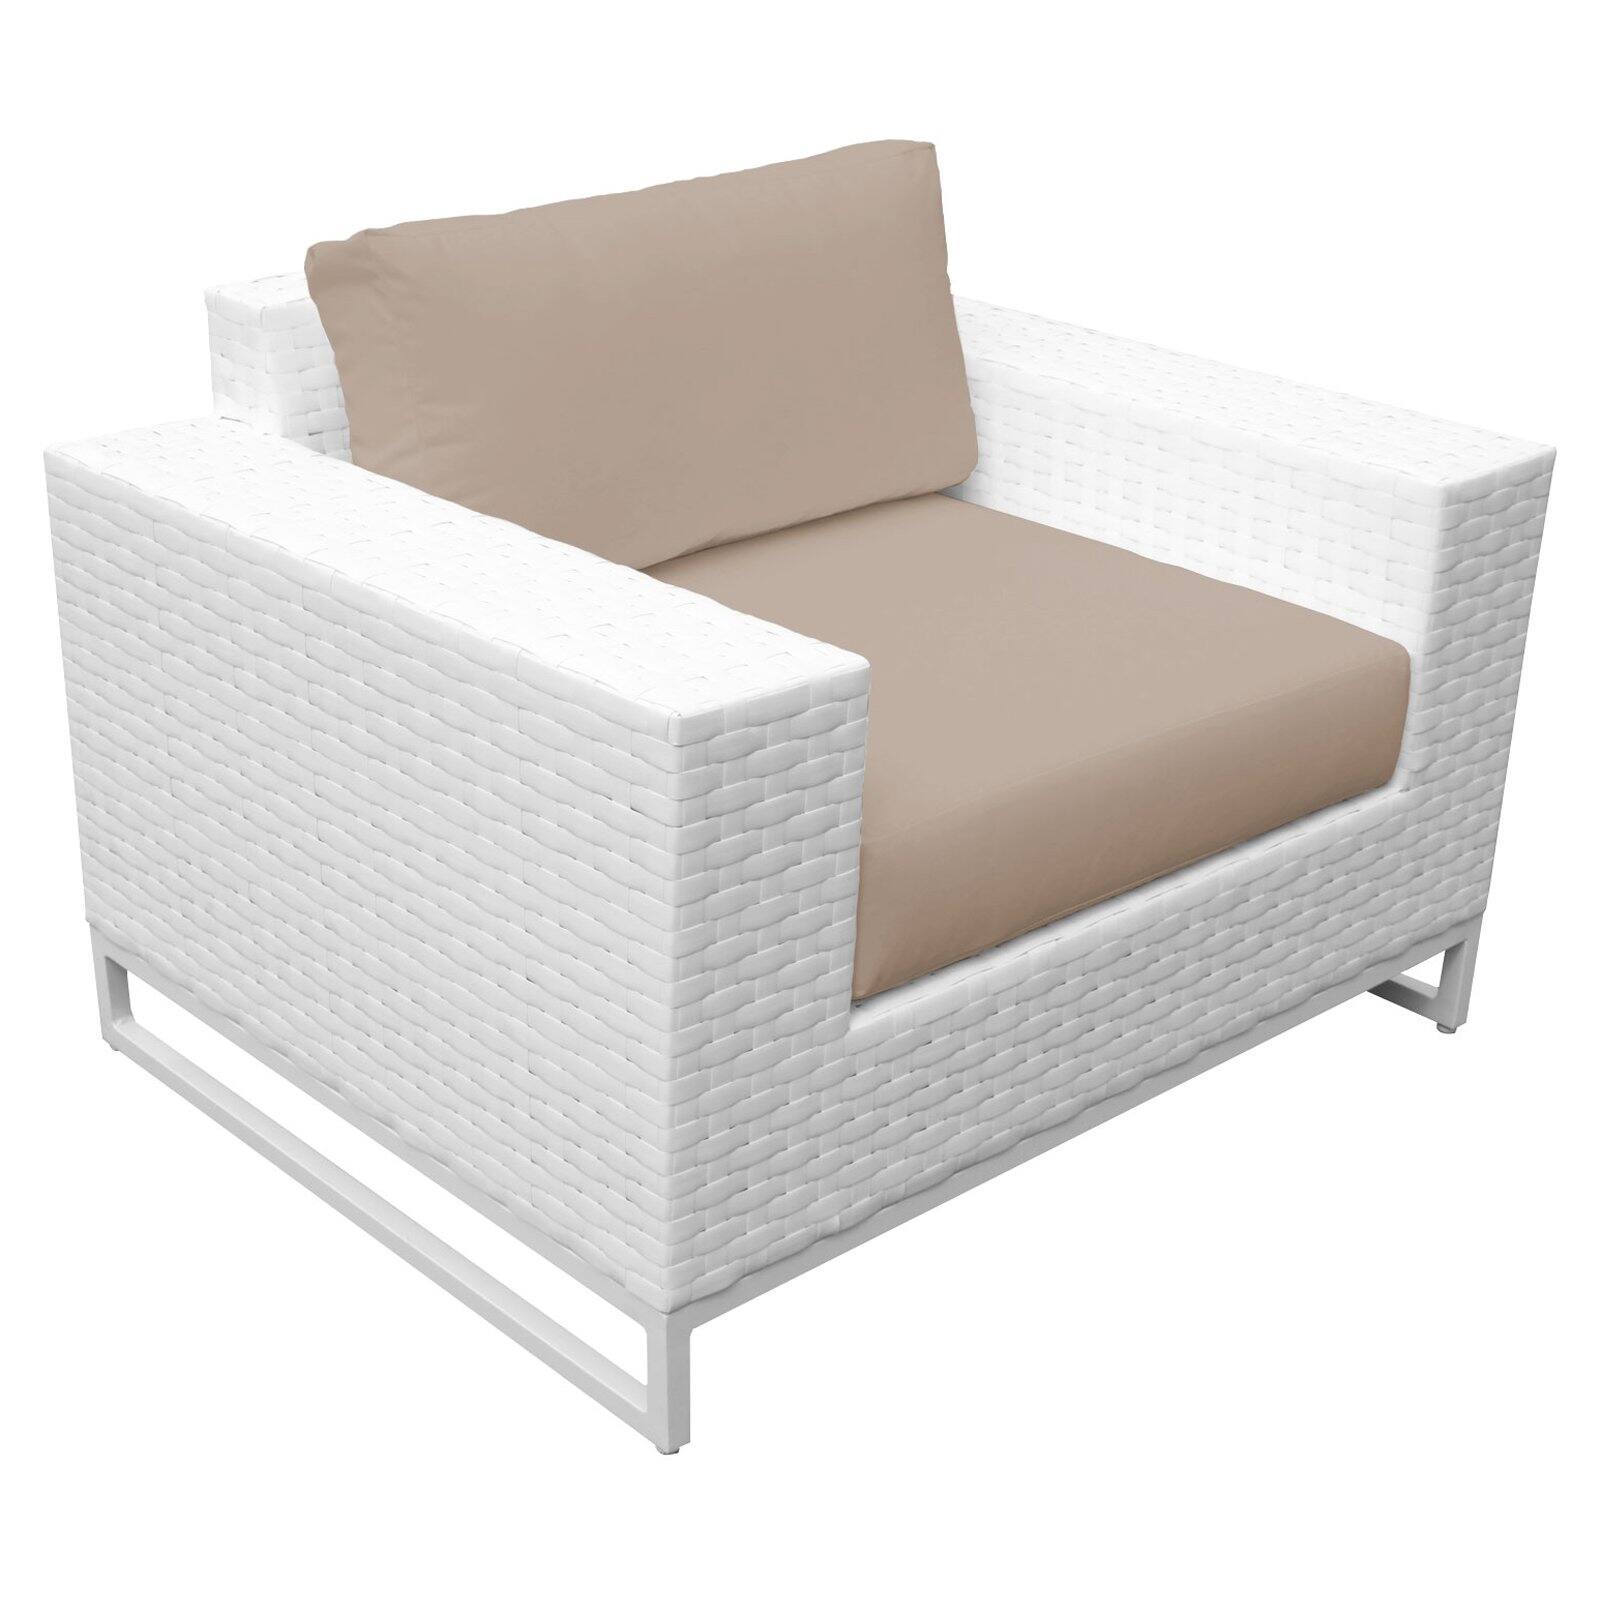 TK Classics Miami Outdoor Club Chair - image 2 of 2